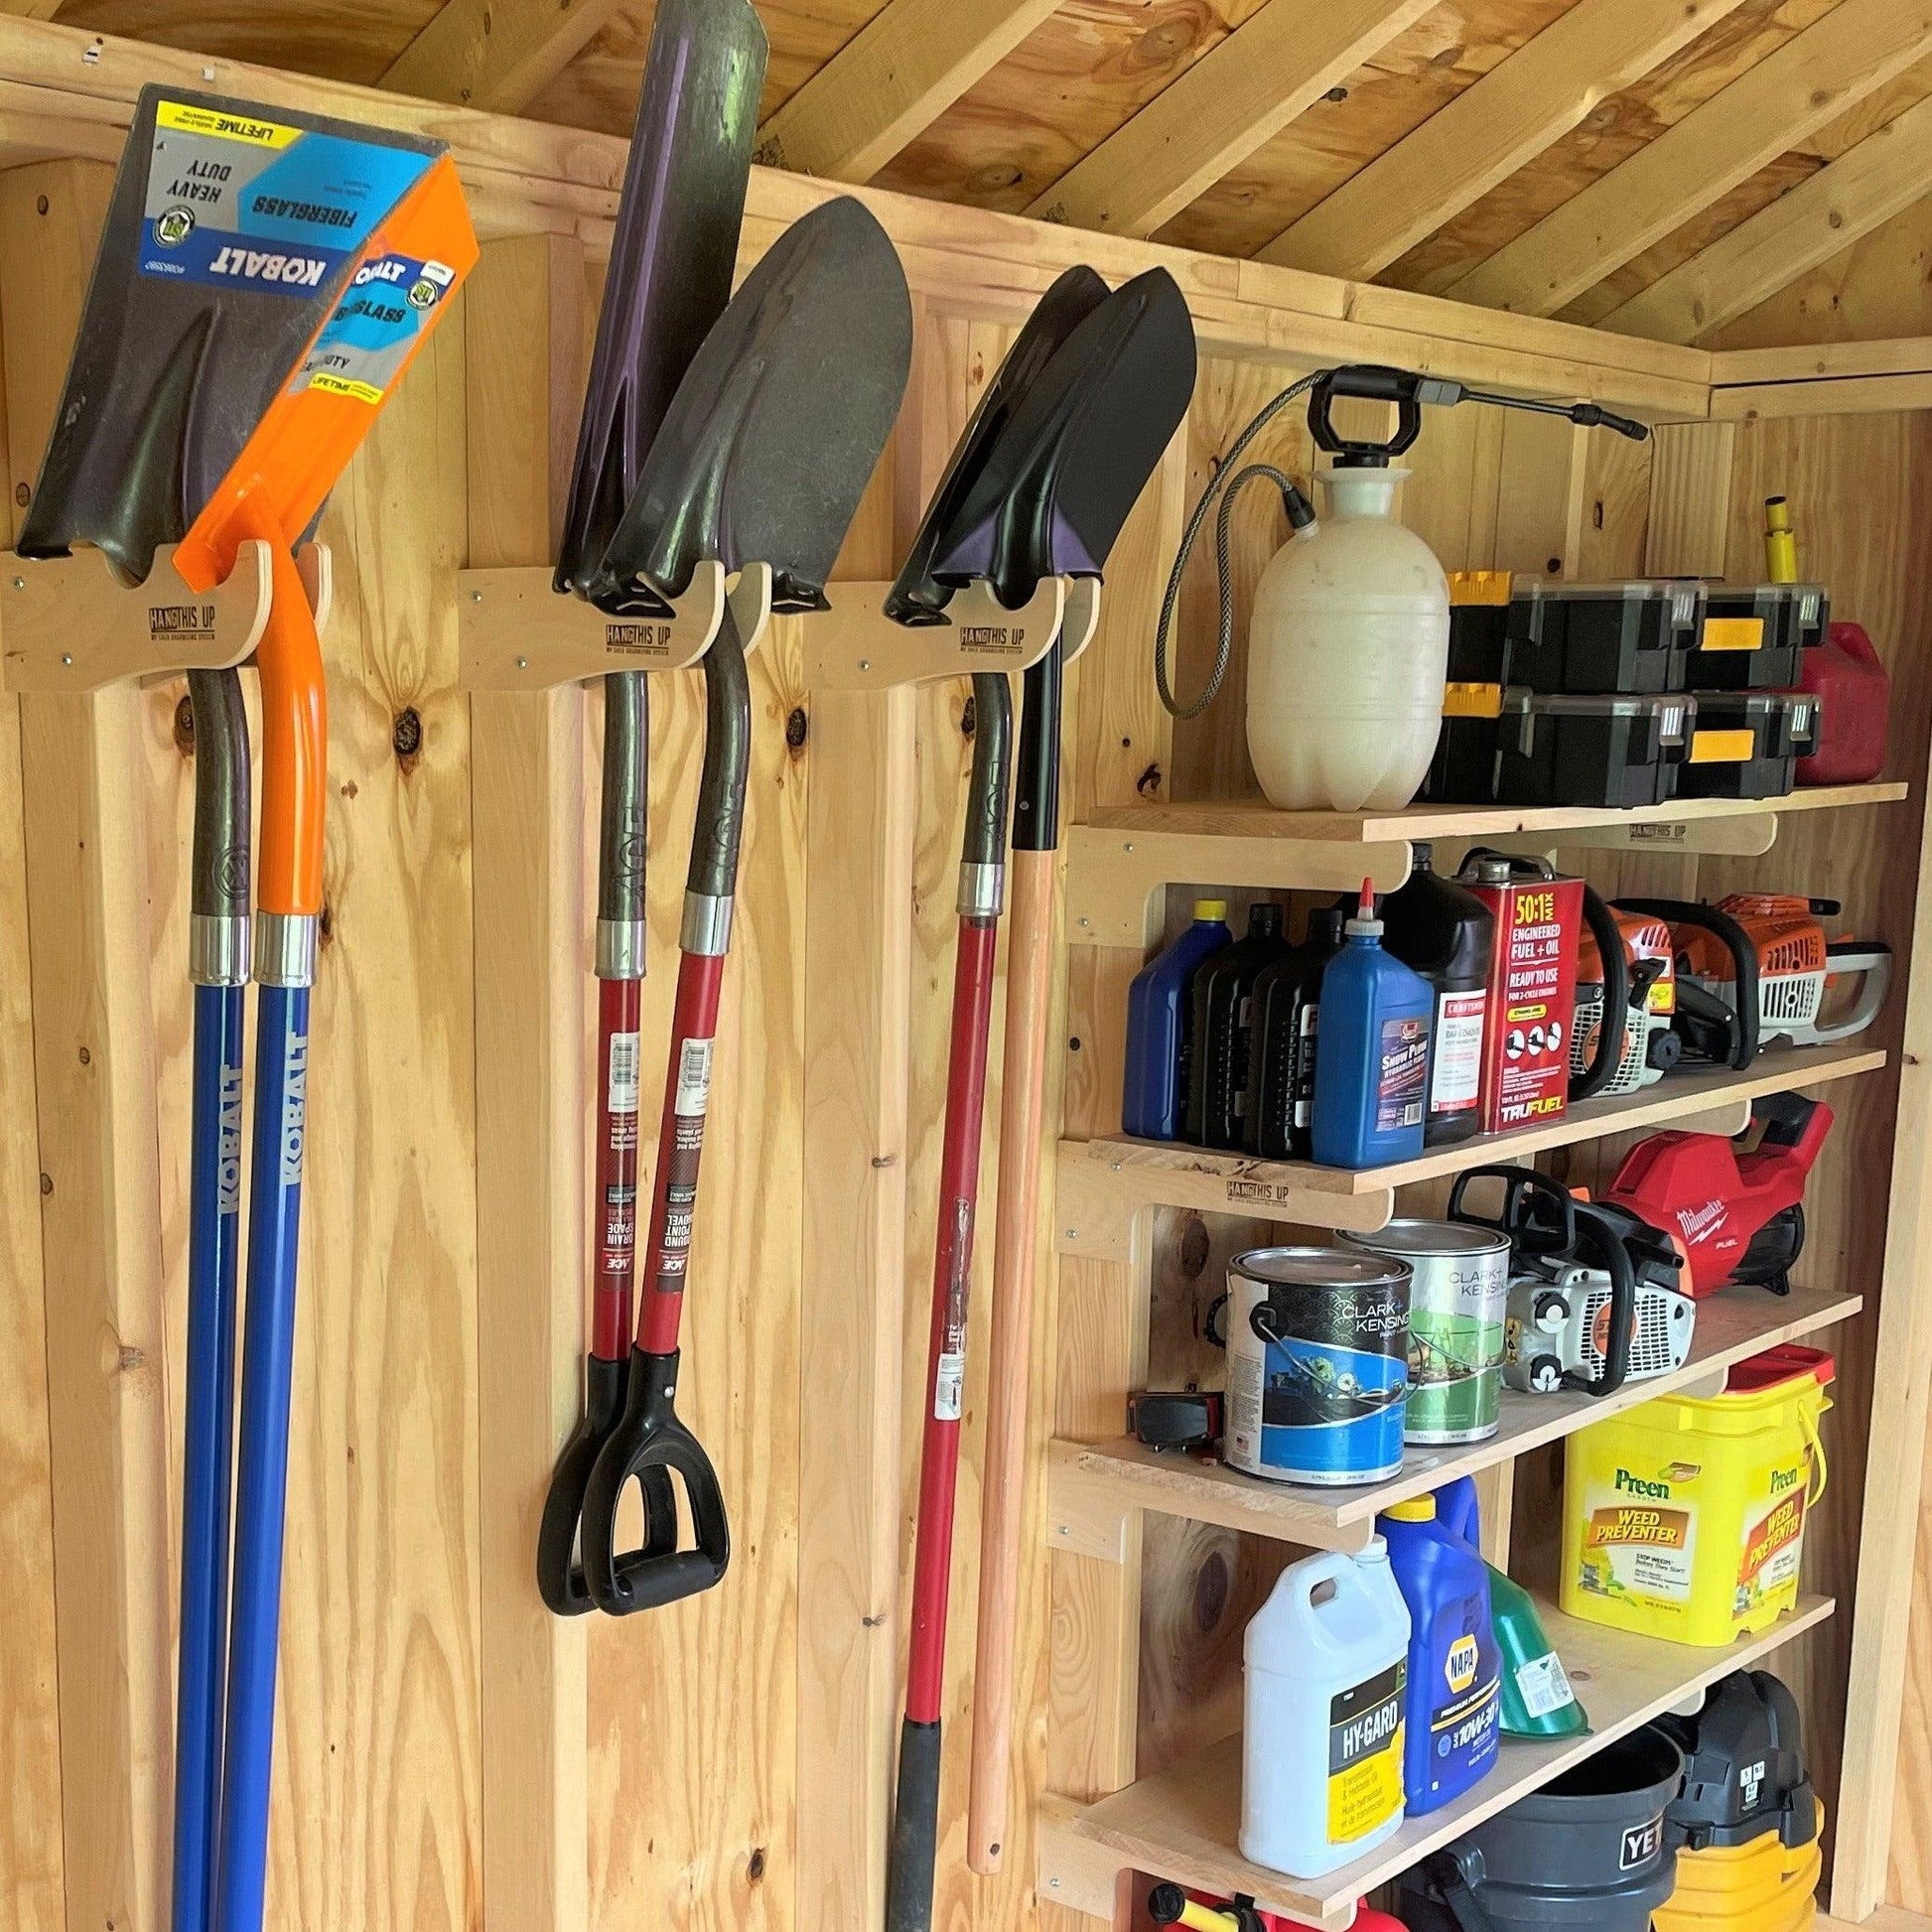 MAX SHED KIT | Storage Shed, Garden Shed, Sheds For Sale, Yard Tool Organizer, Garden Tool Storage, Yard tool Rack, Shed Accessories - TRAPSKI, LLC